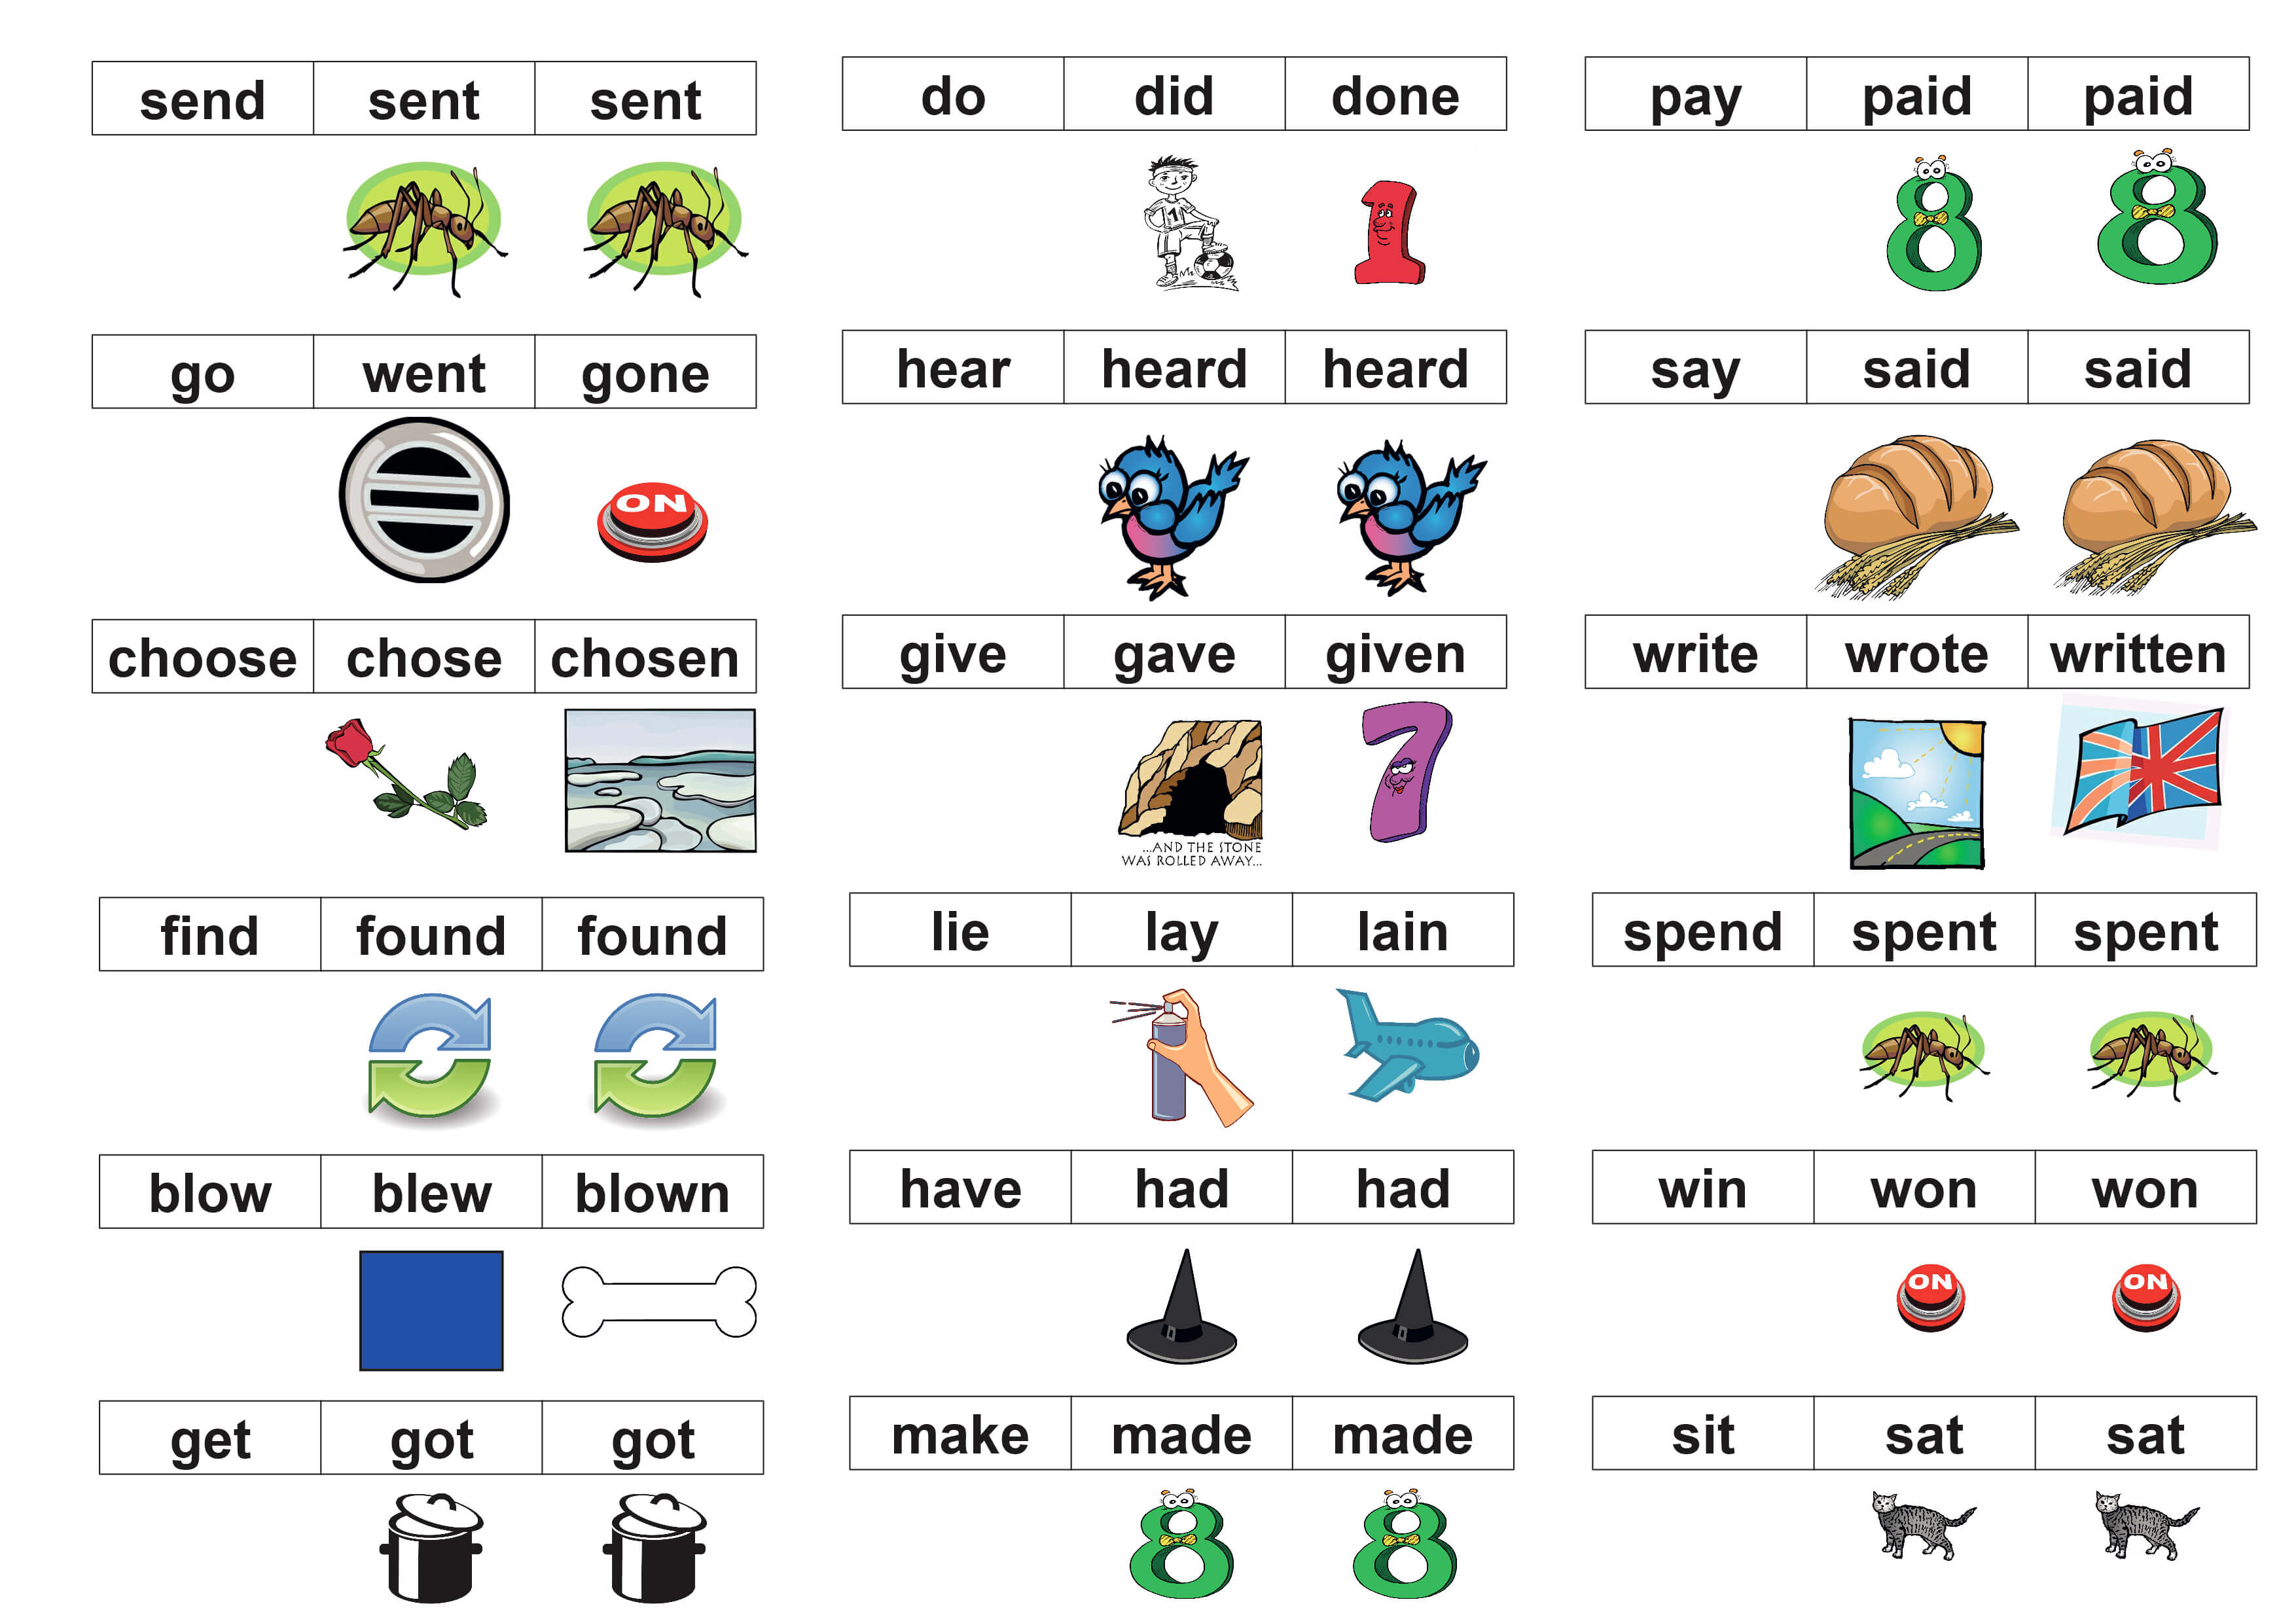 Irregular verbs in pictures - Games to learn English ...